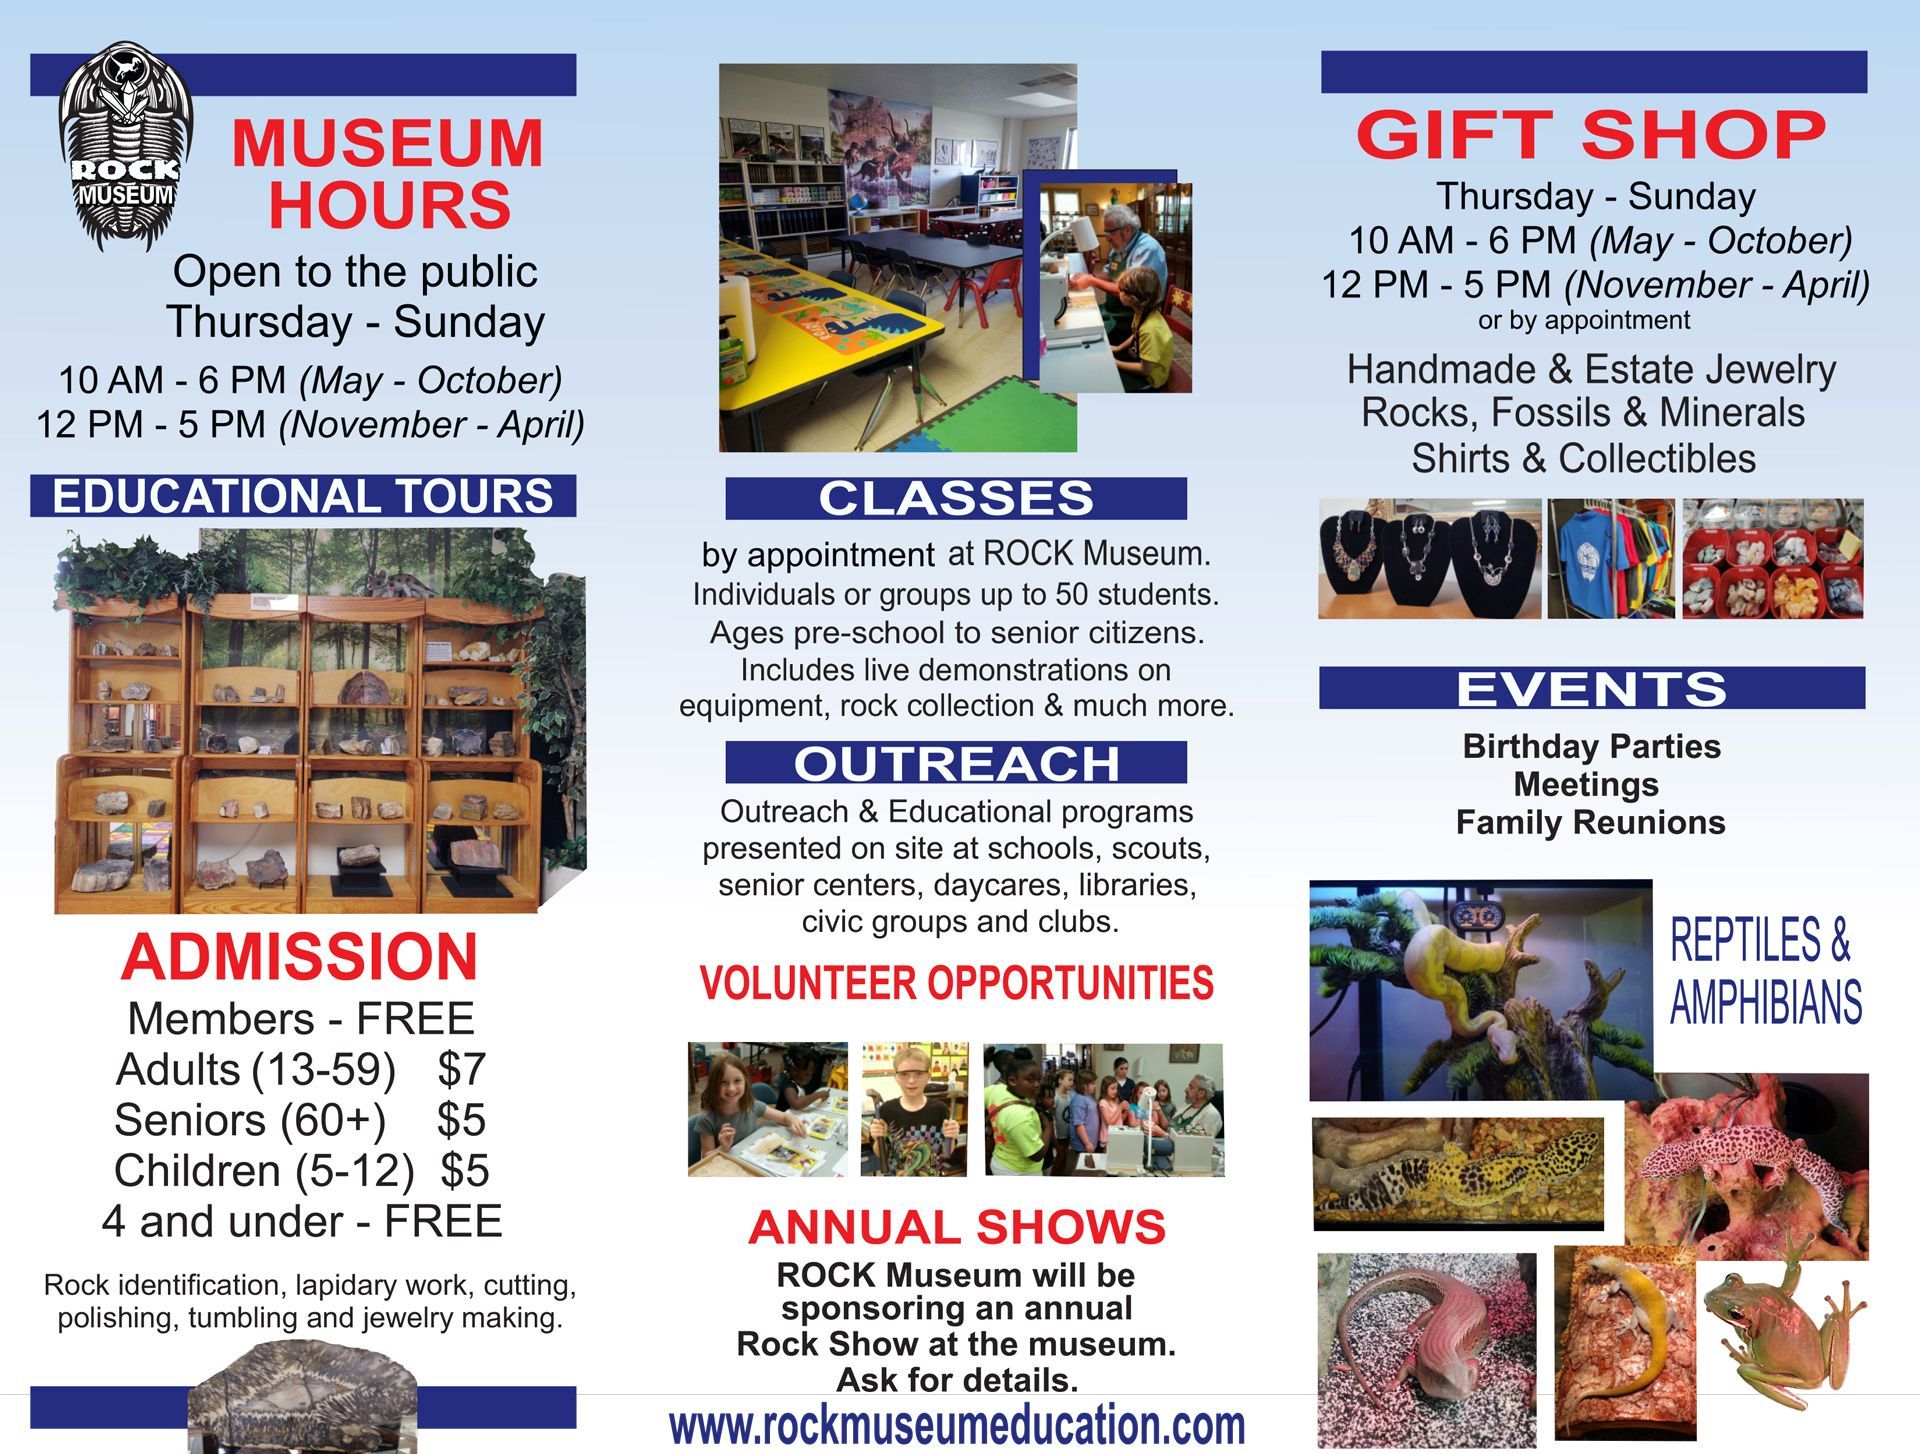 A brochure for a museum hours and gift shop